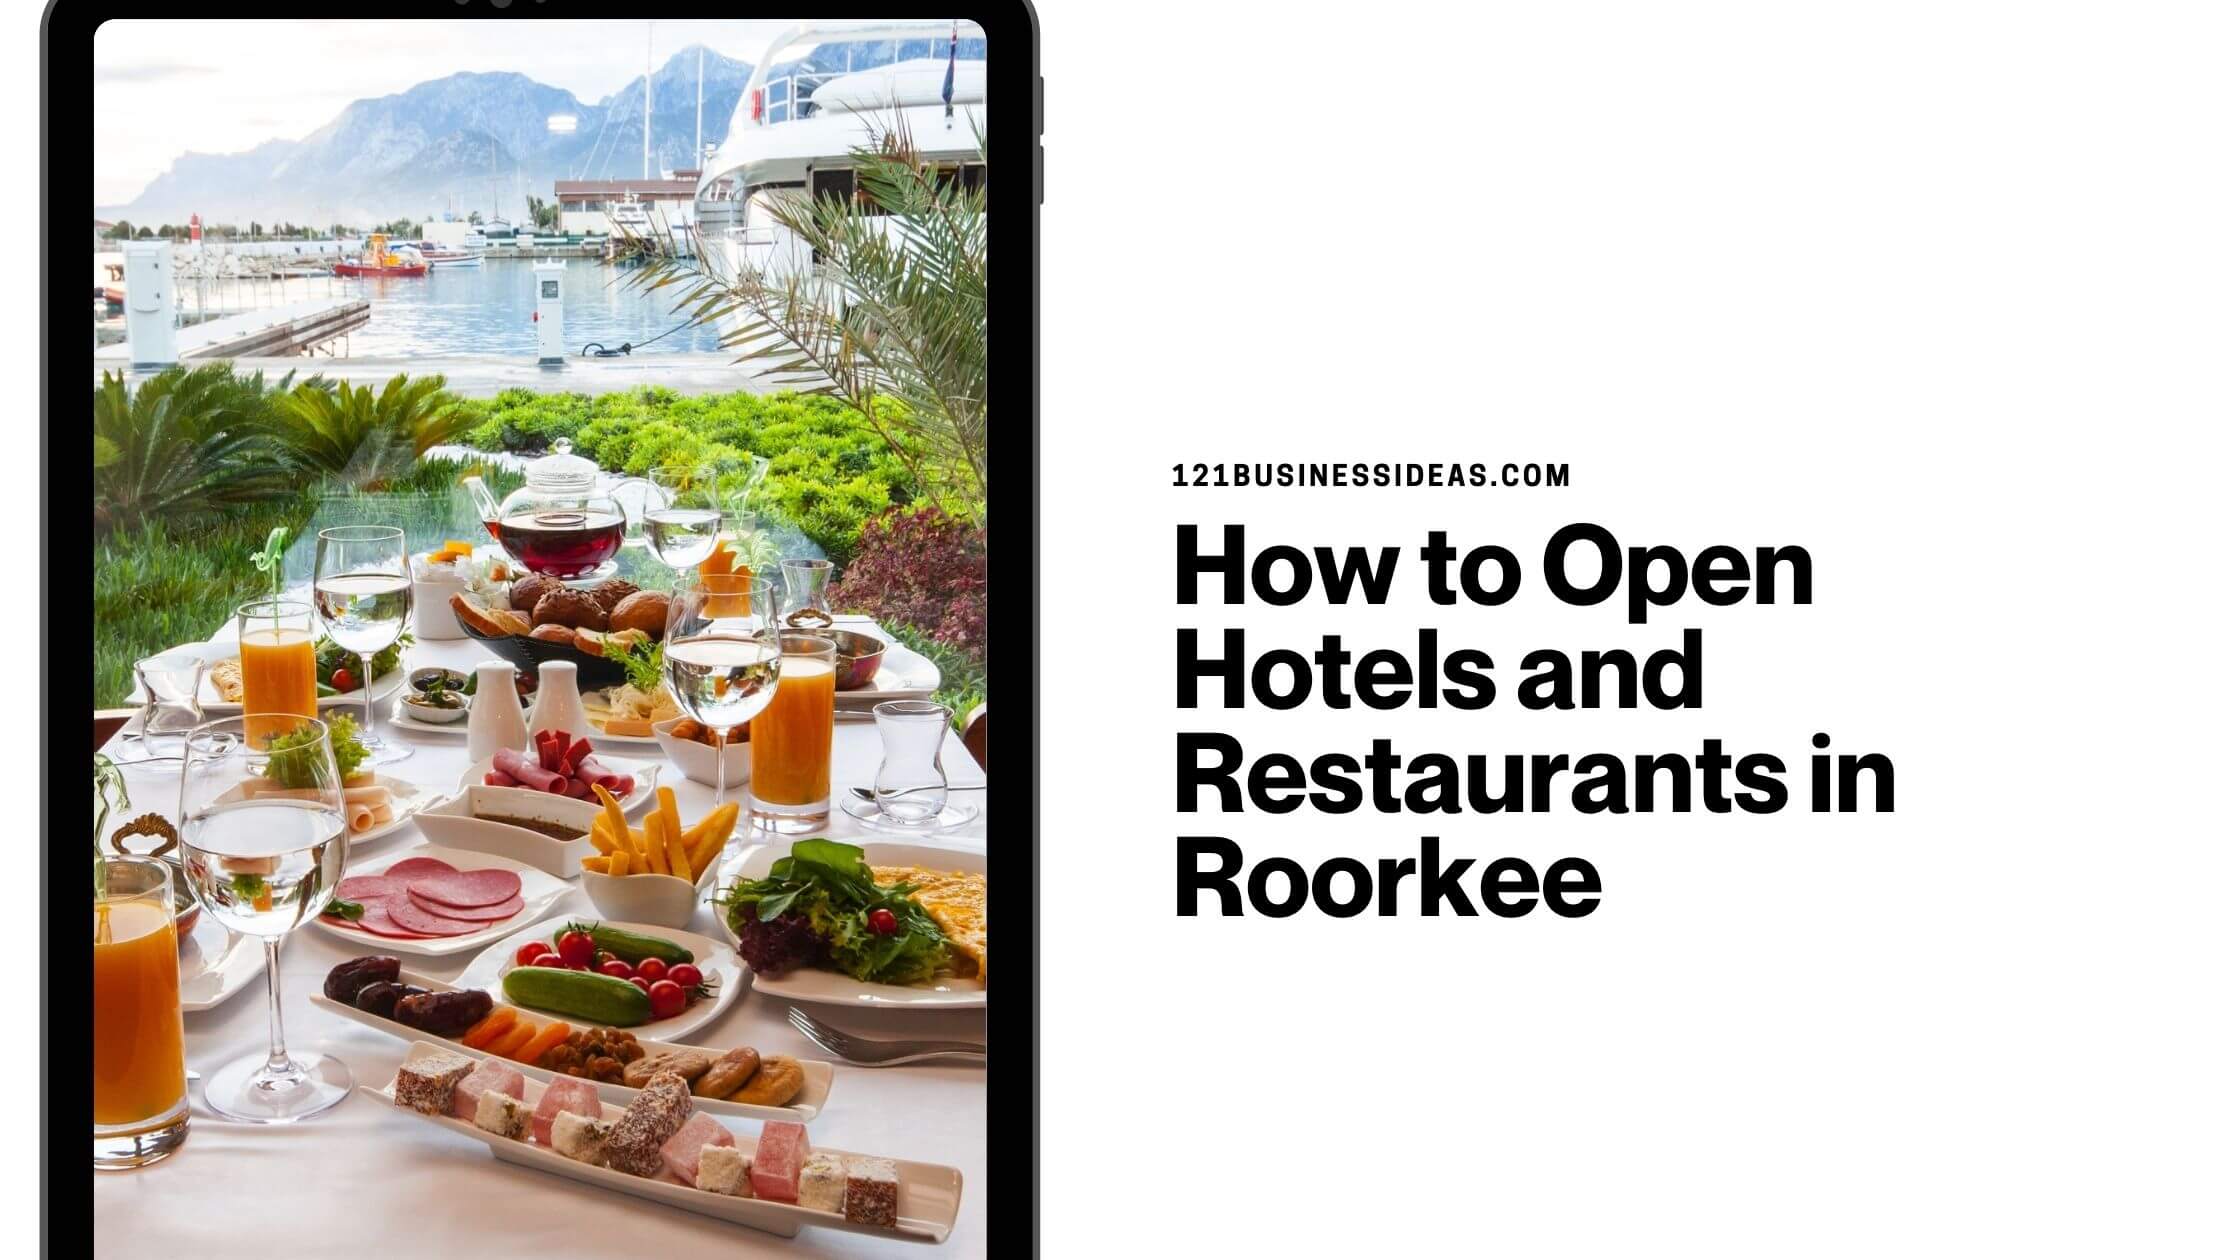 How to Open Hotels and Restaurants in Roorkee (1)